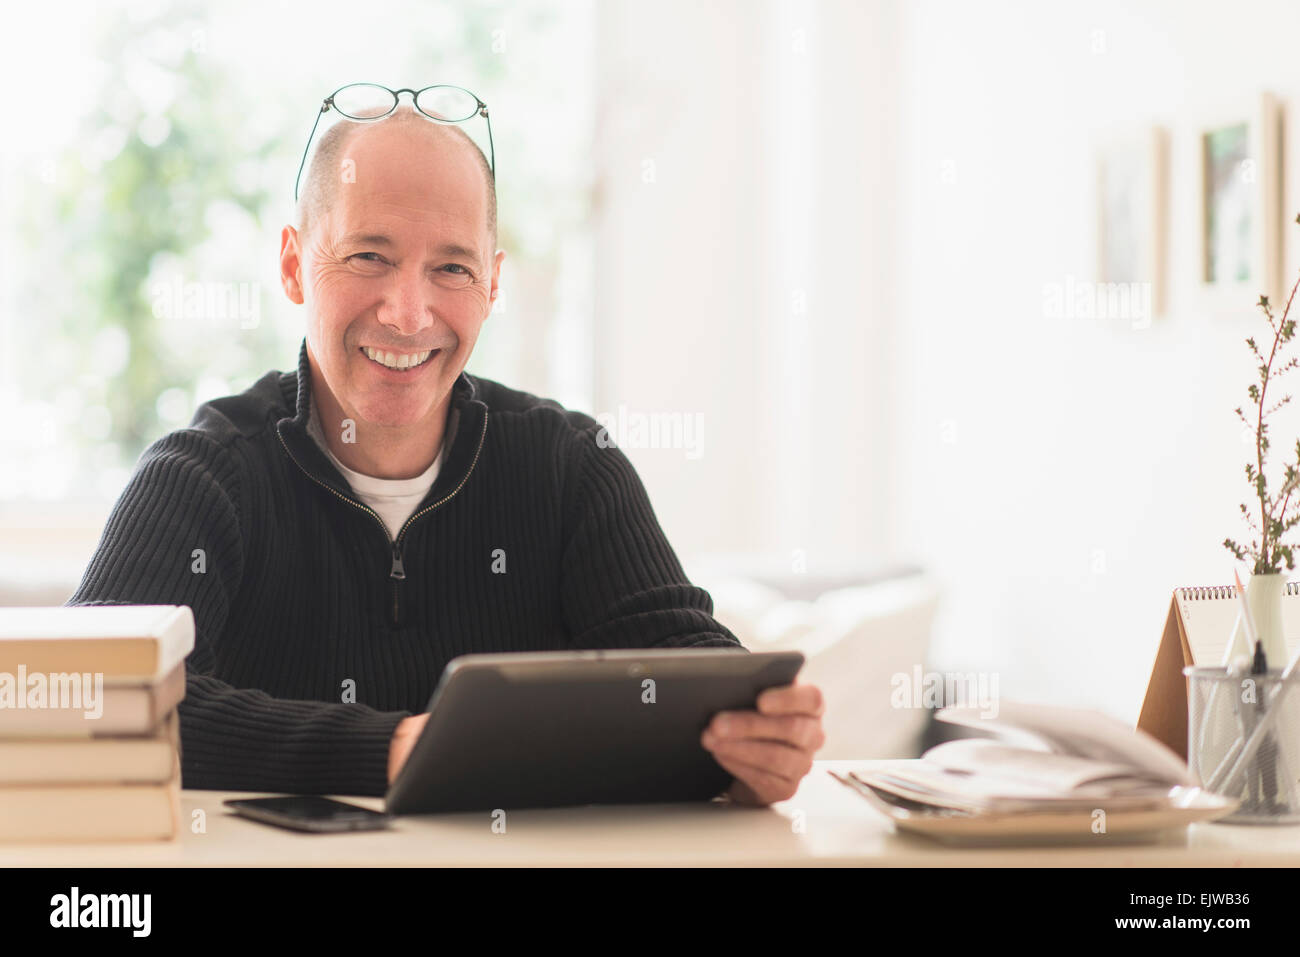 Portrait of smiling mature man working in home office Stock Photo